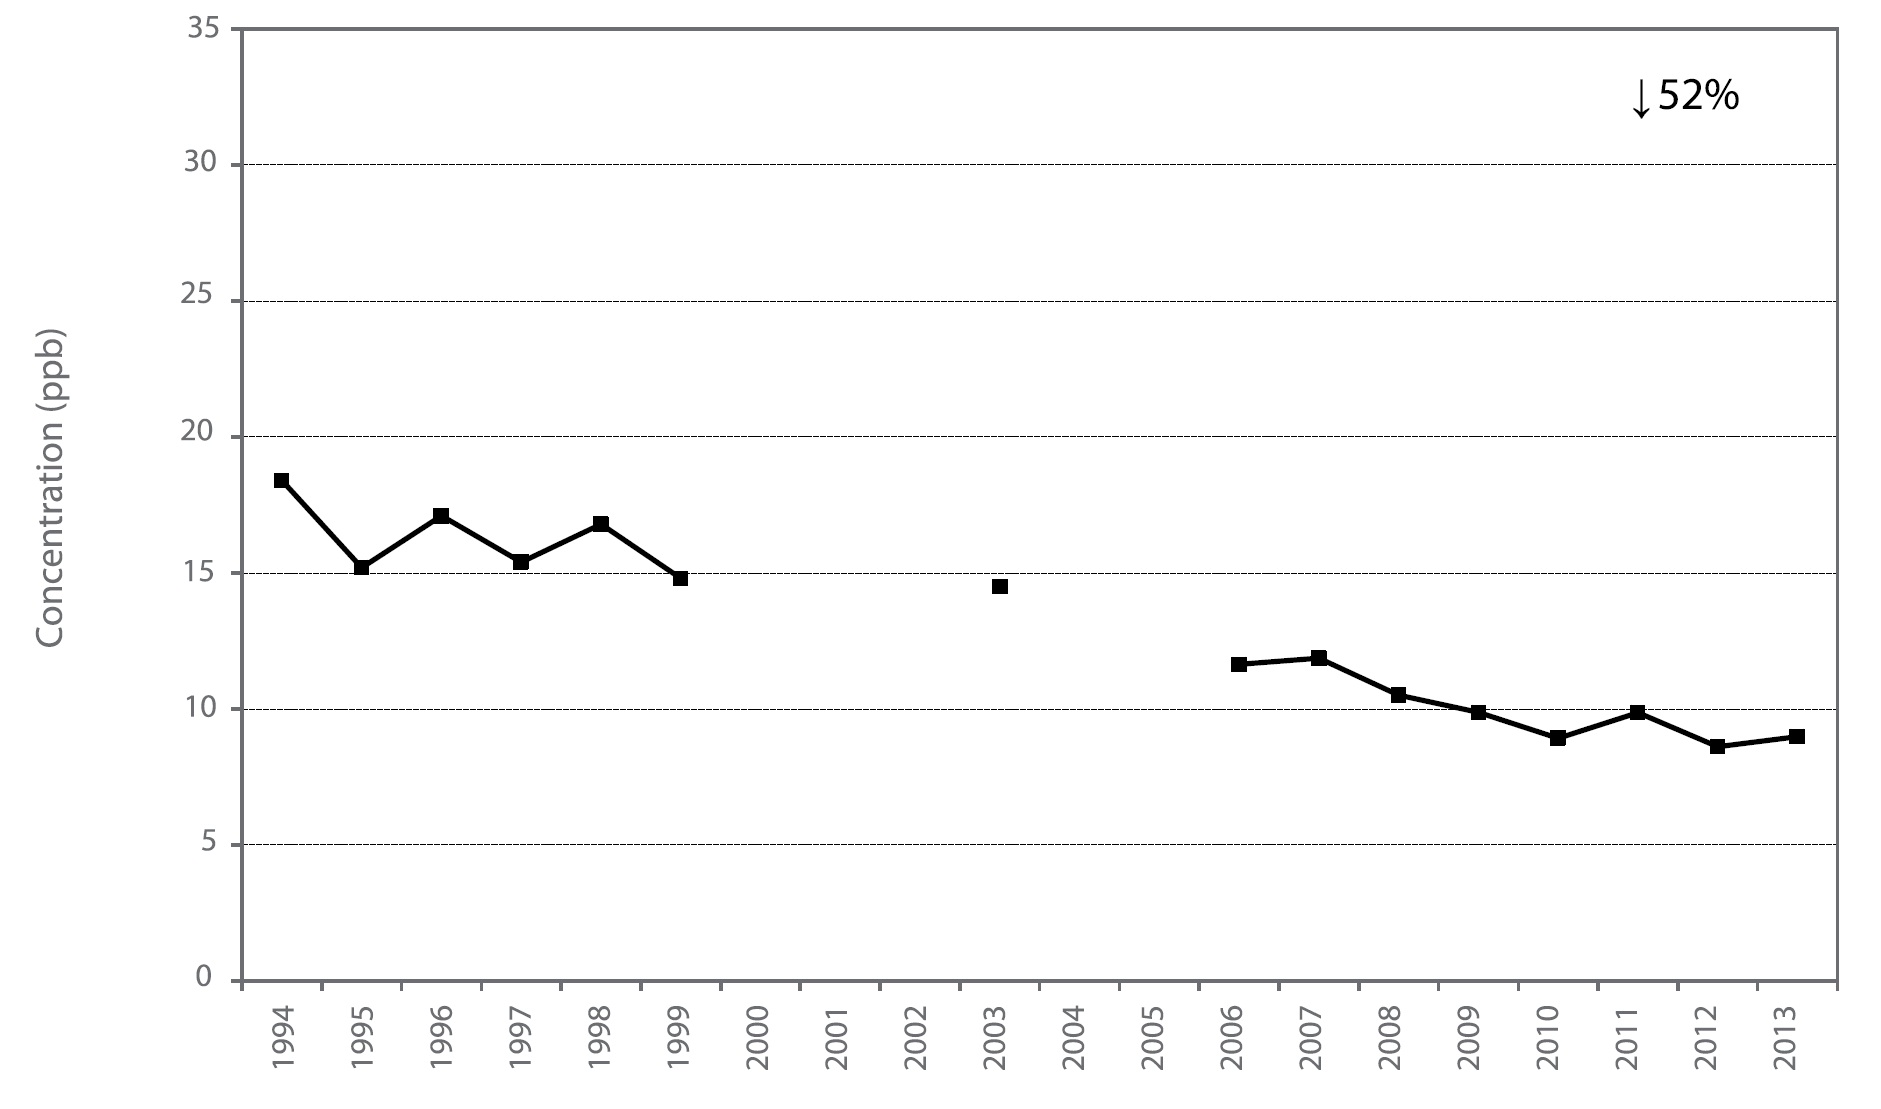 Figure A33 is a line chart displaying the nitrogen dioxide annual mean at Hamilton Mountain from 1994 to 2013. Over this 20-year period, nitrogen dioxide decreased 52%.